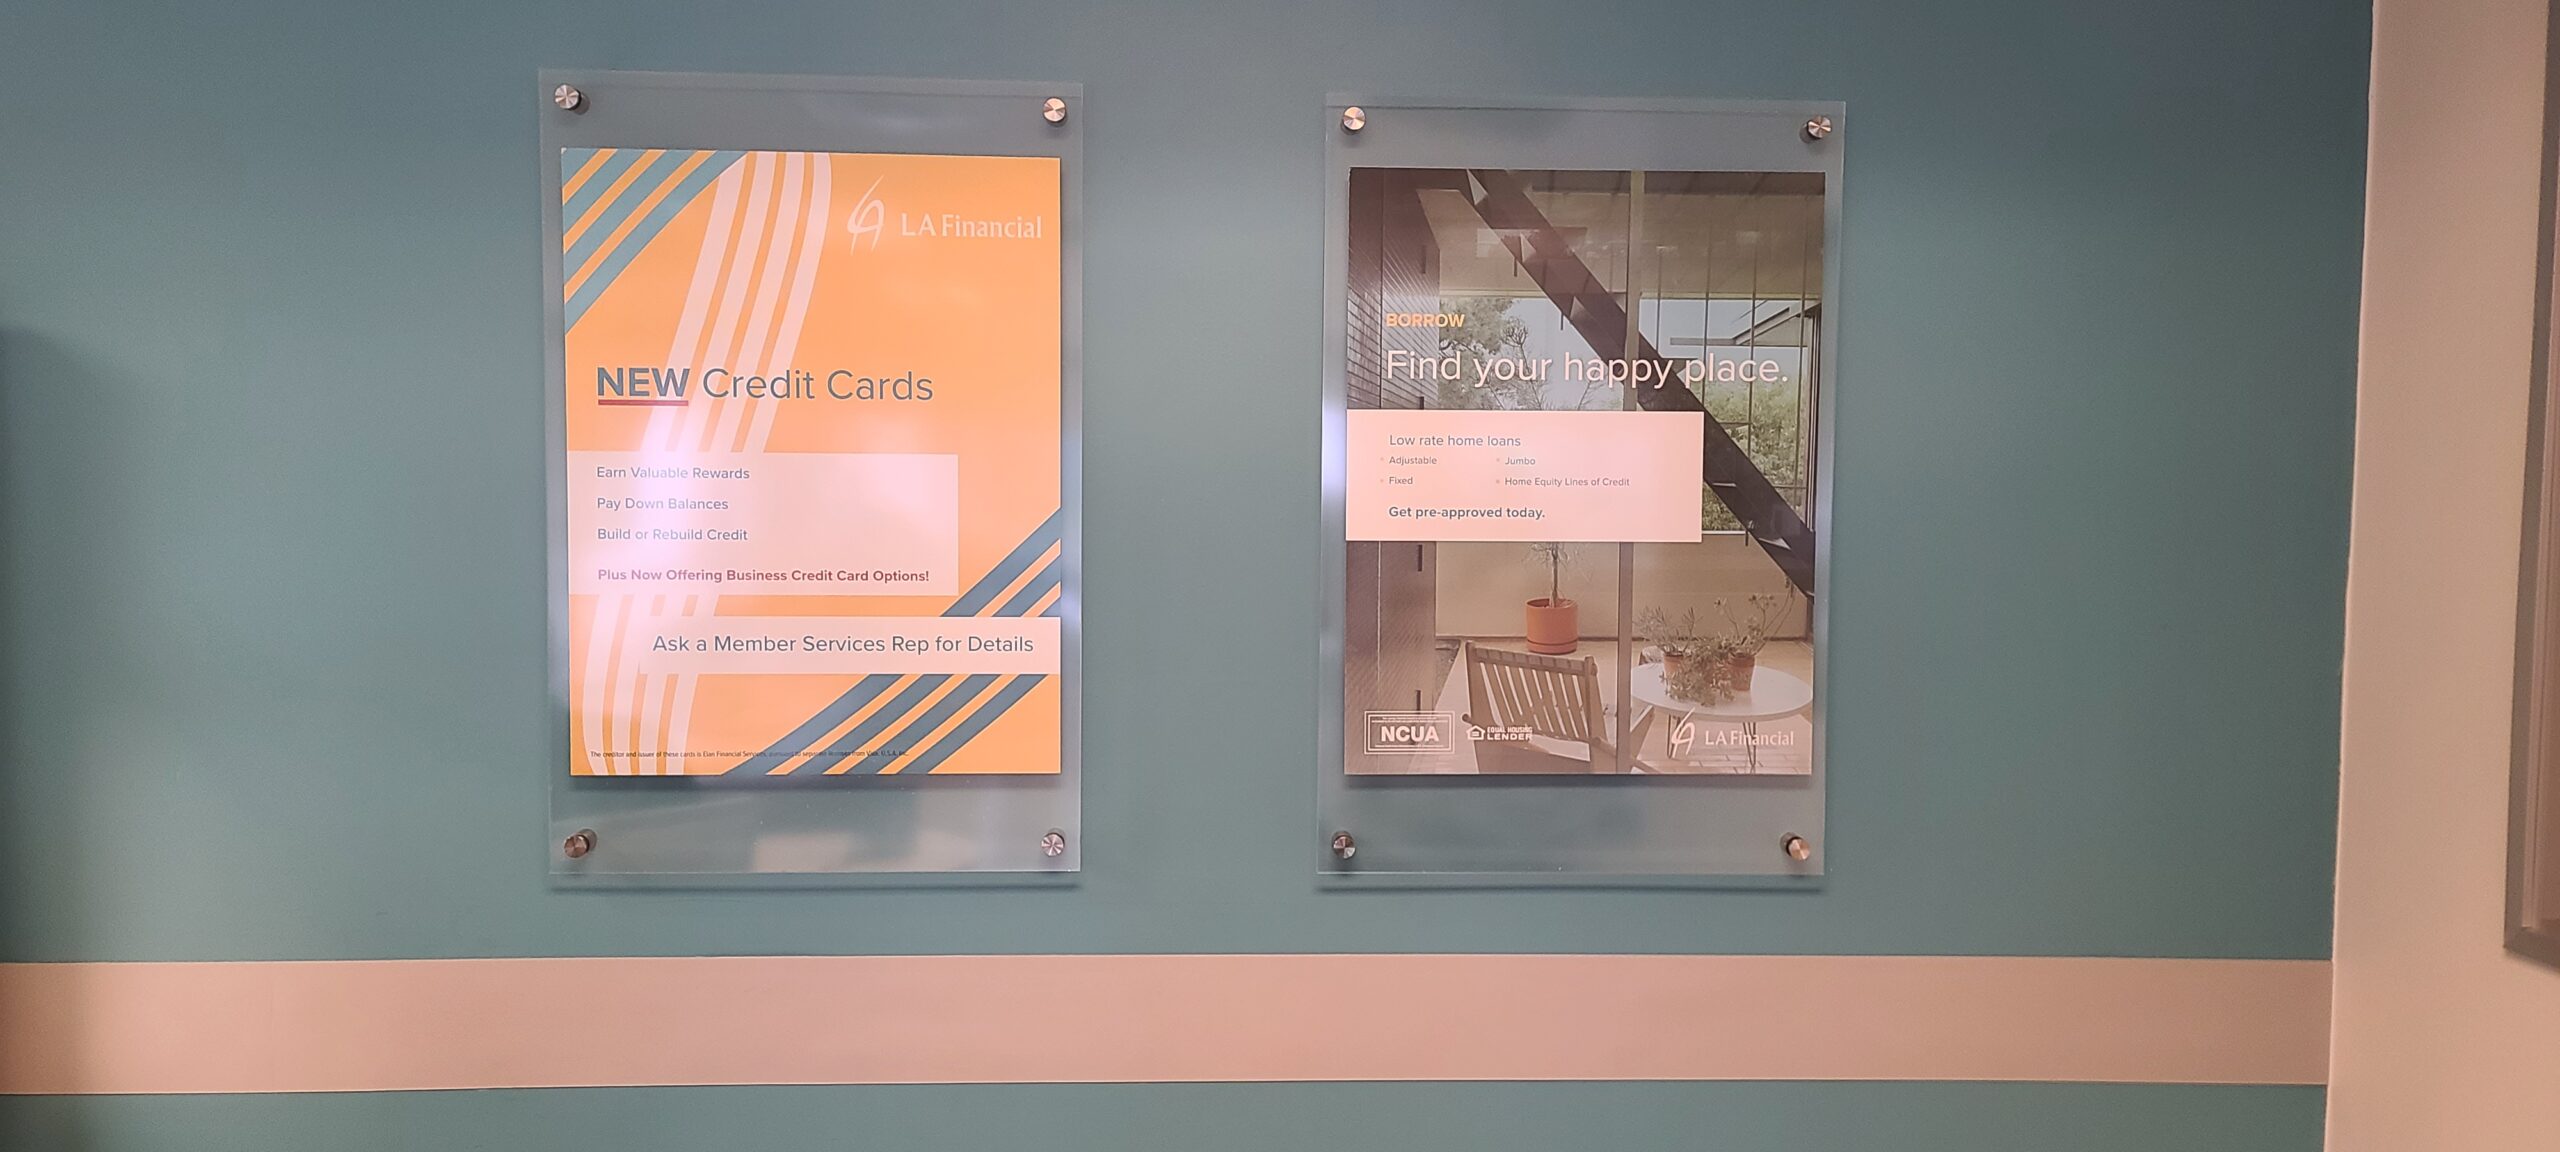 These acrylic poster holders for LA Financial's Pasadena office lets them spruce up the place with colorful displays that advertise their services, like new credit cards and low-rate home loans.